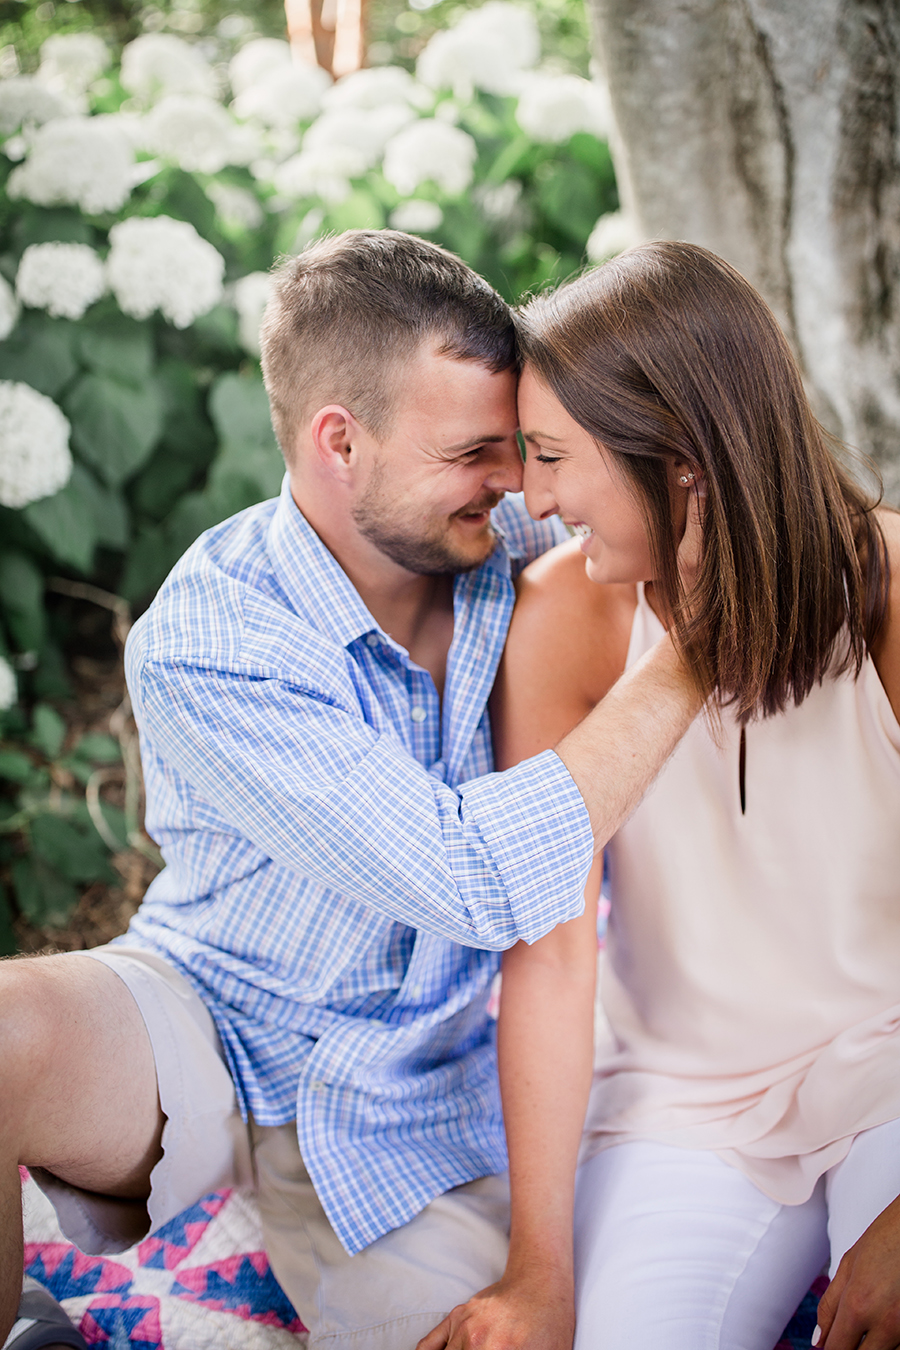 Holding her face laughing at this Estate of Grace engagement session by Knoxville Wedding Photographer, Amanda May Photos.